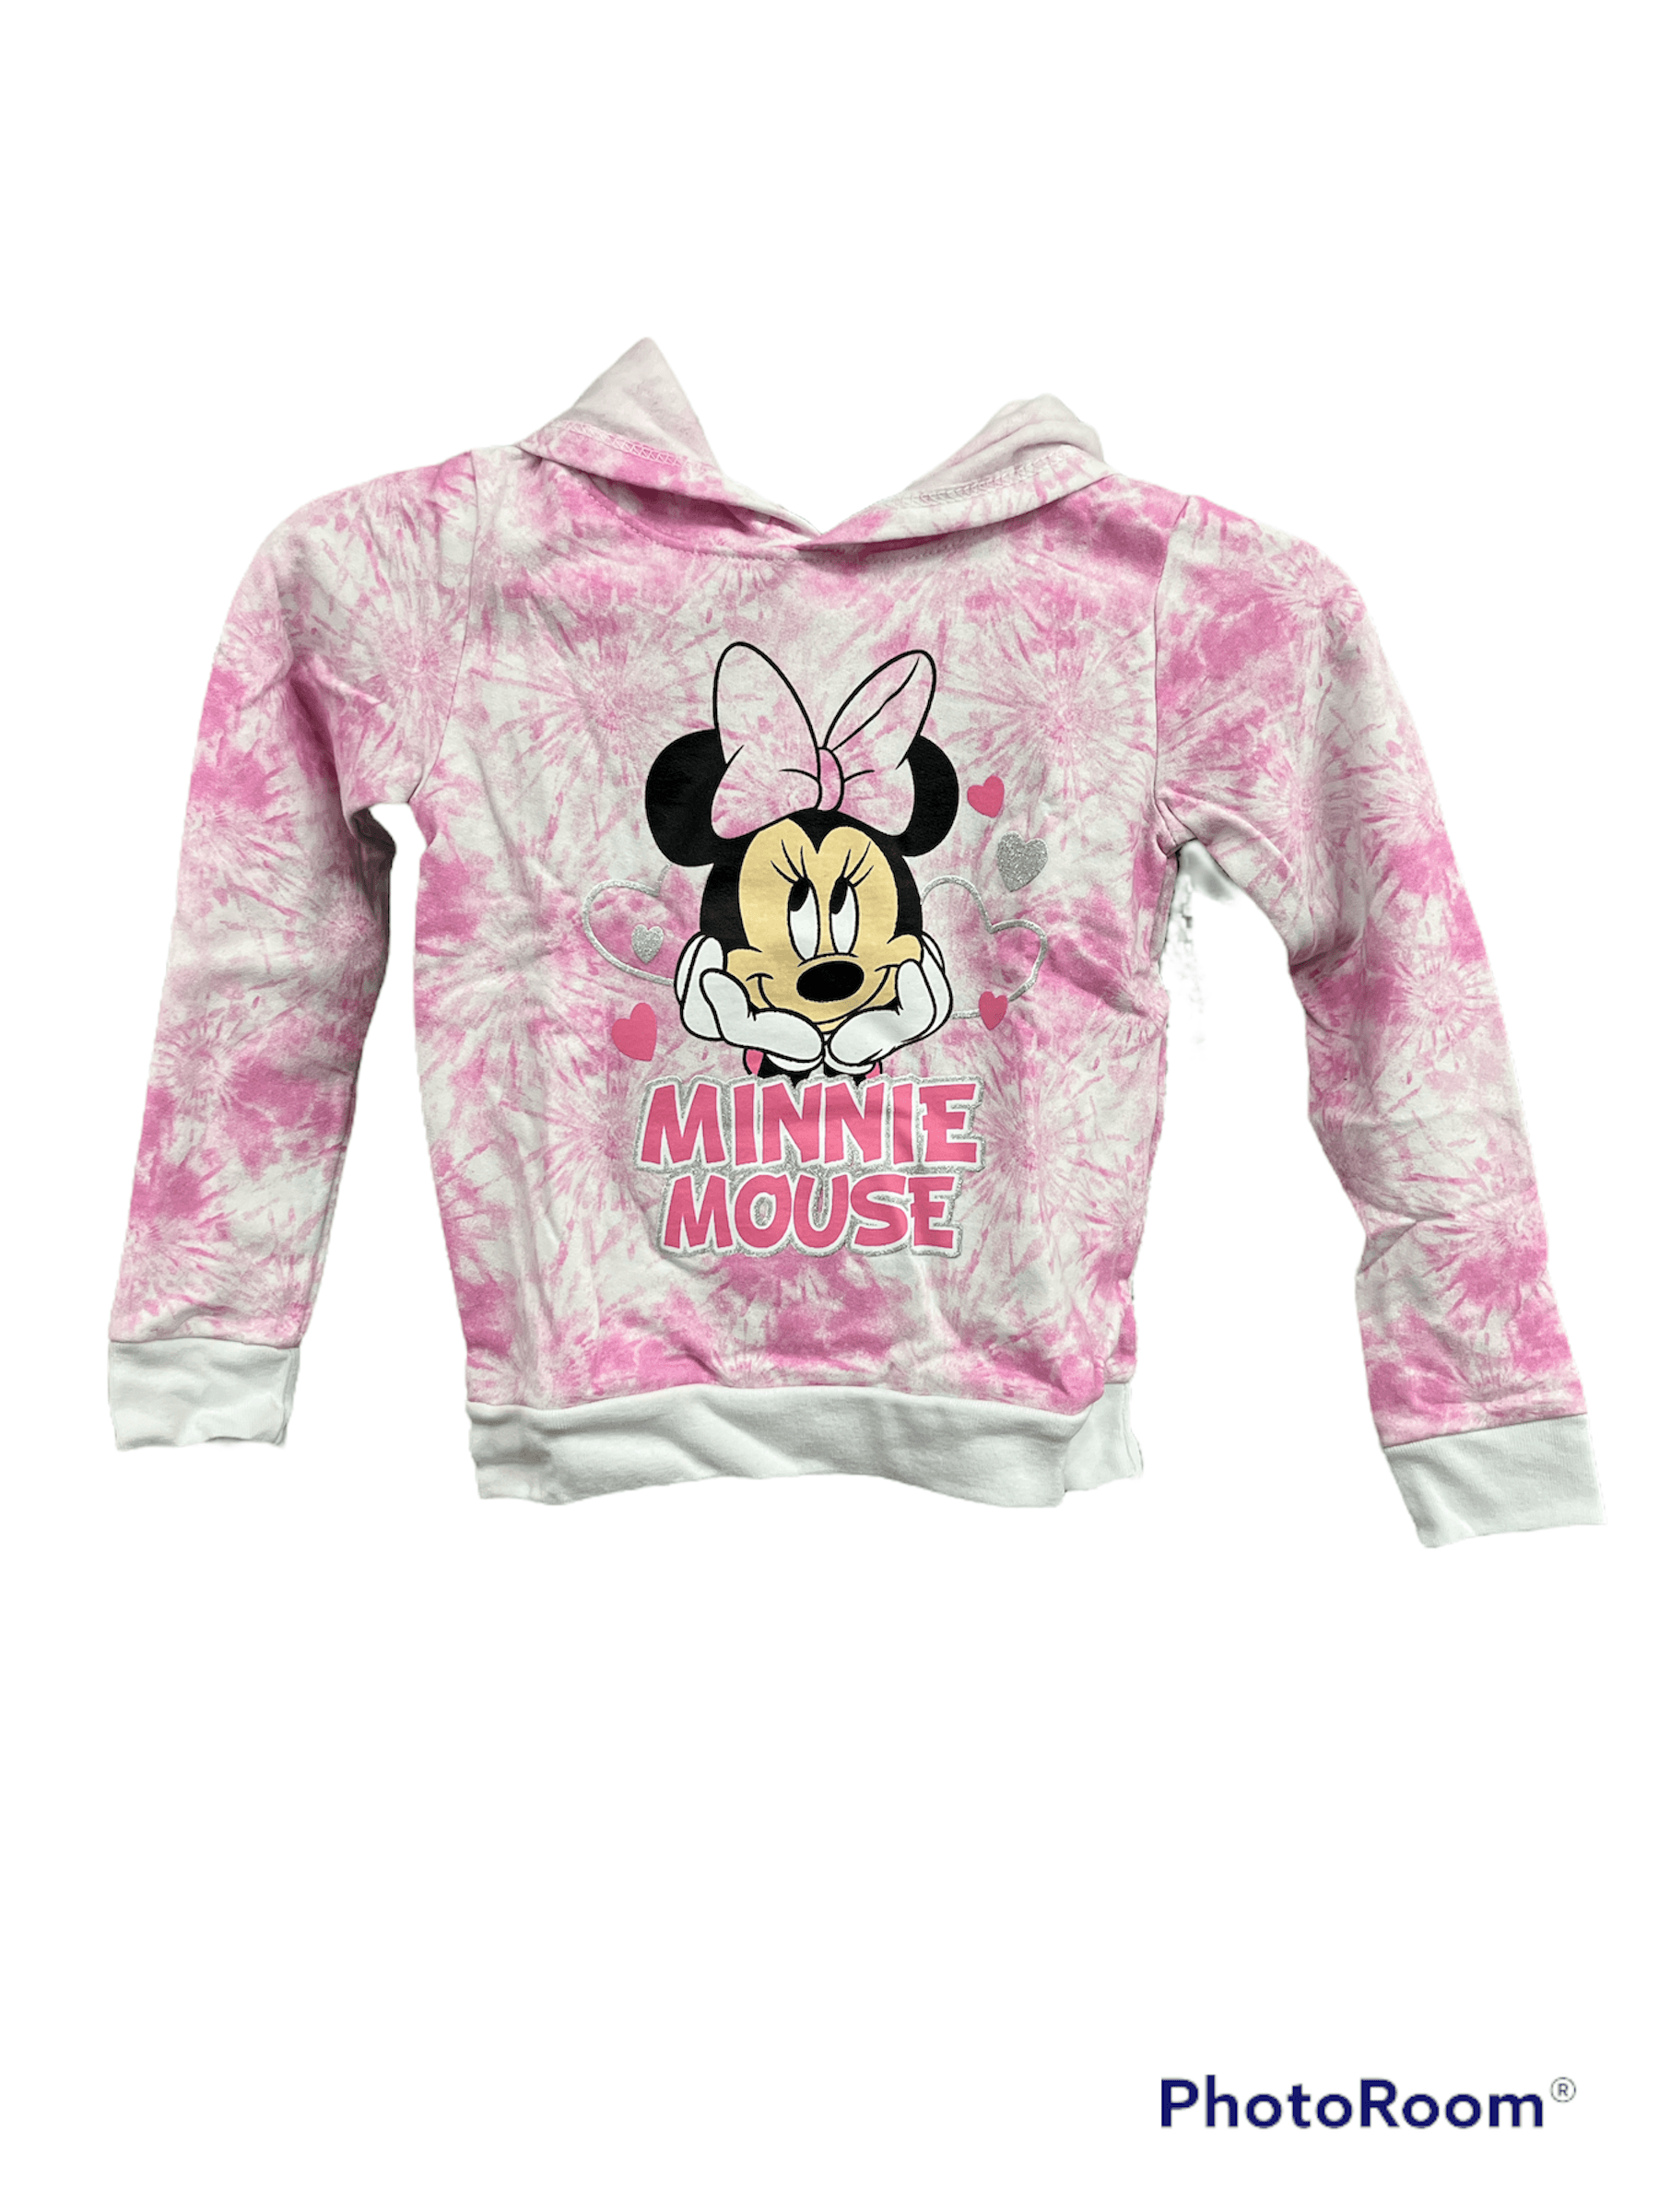 Disney Baby Minnie Mouse Hooded Sweatshirt Pink and White